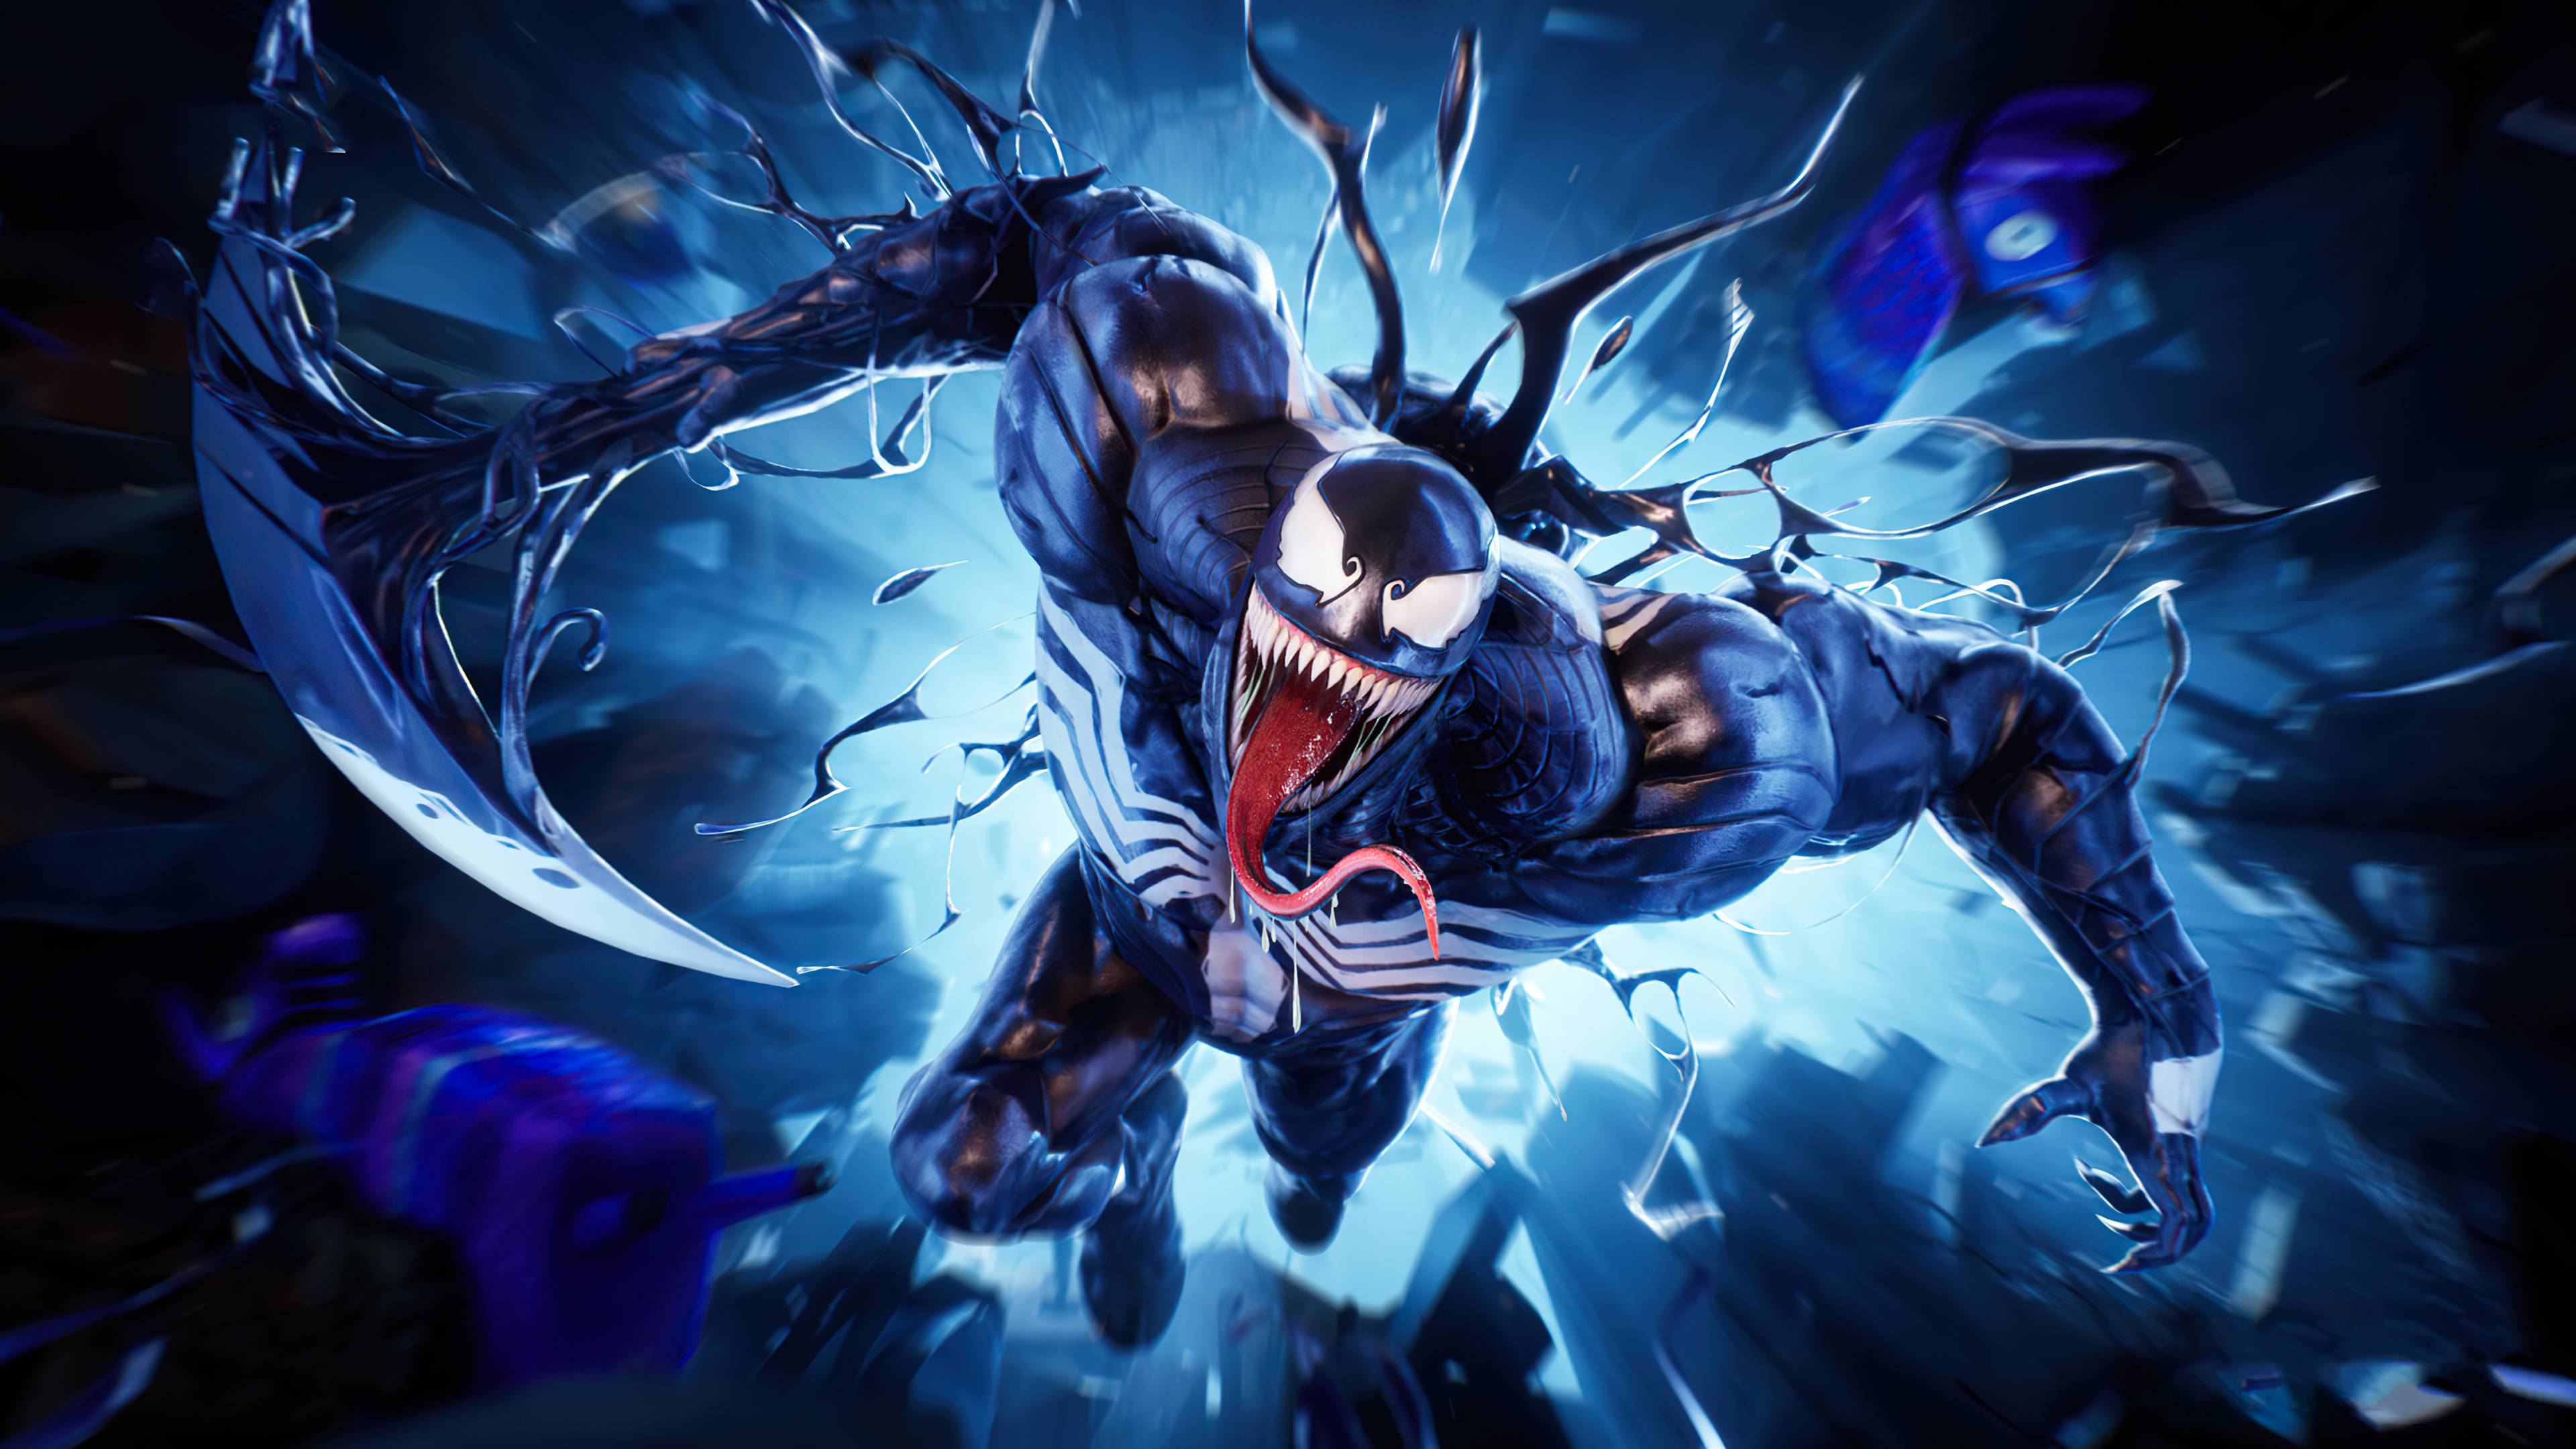 Venom Movie Official Poster 8k Samsung Galaxy Note iPhone Wallpapers  Free Download